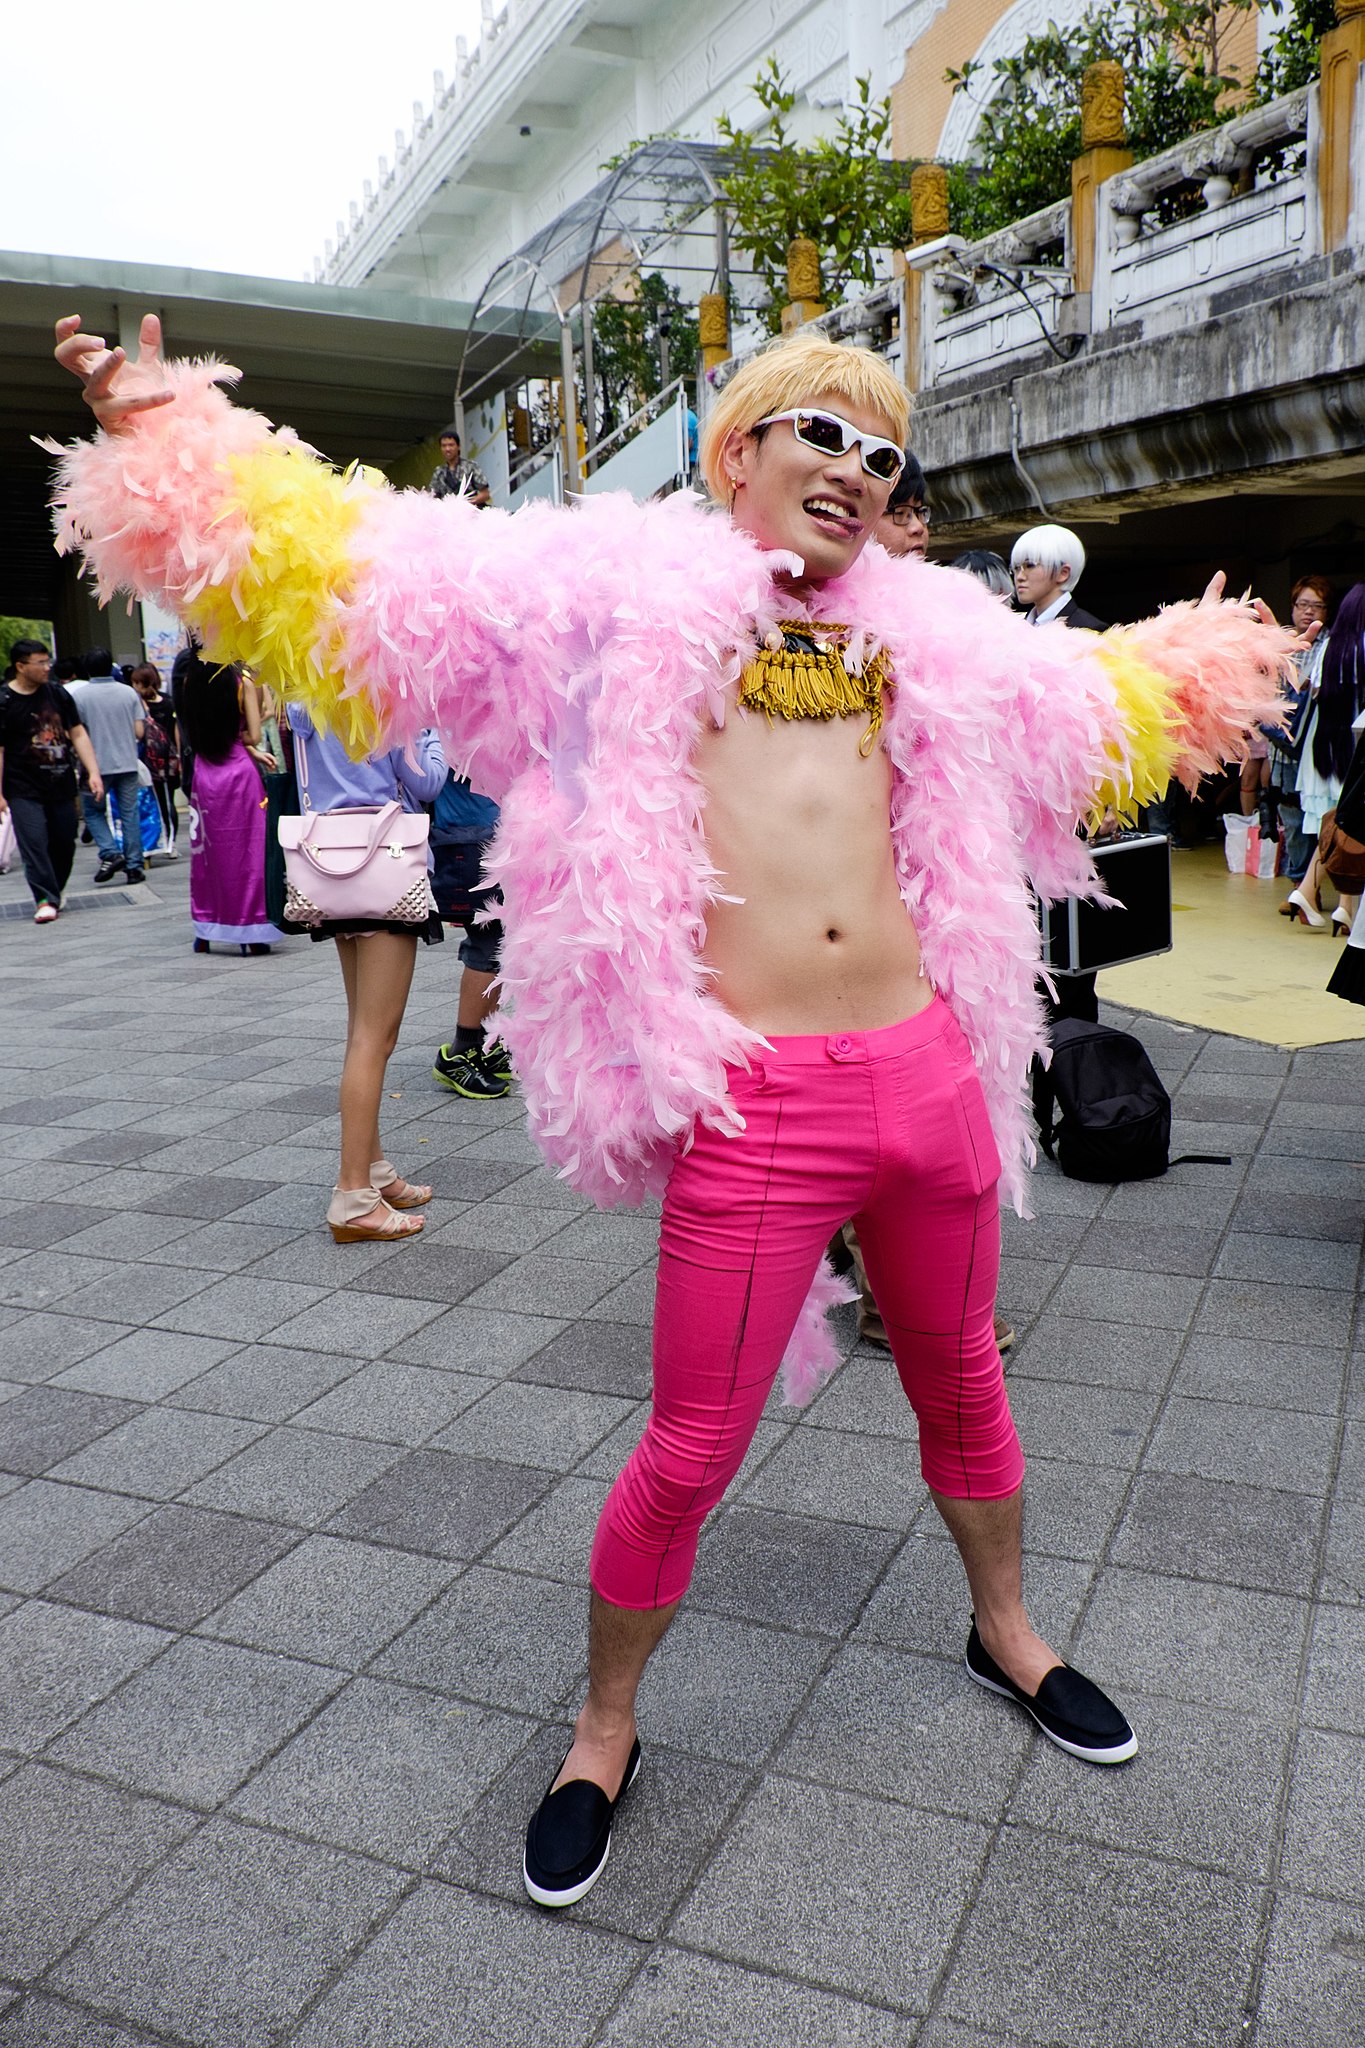 File:Cosplayer of Donquixote Doflamingo from One Piece in PF22 20150509.jpg  - Wikipedia